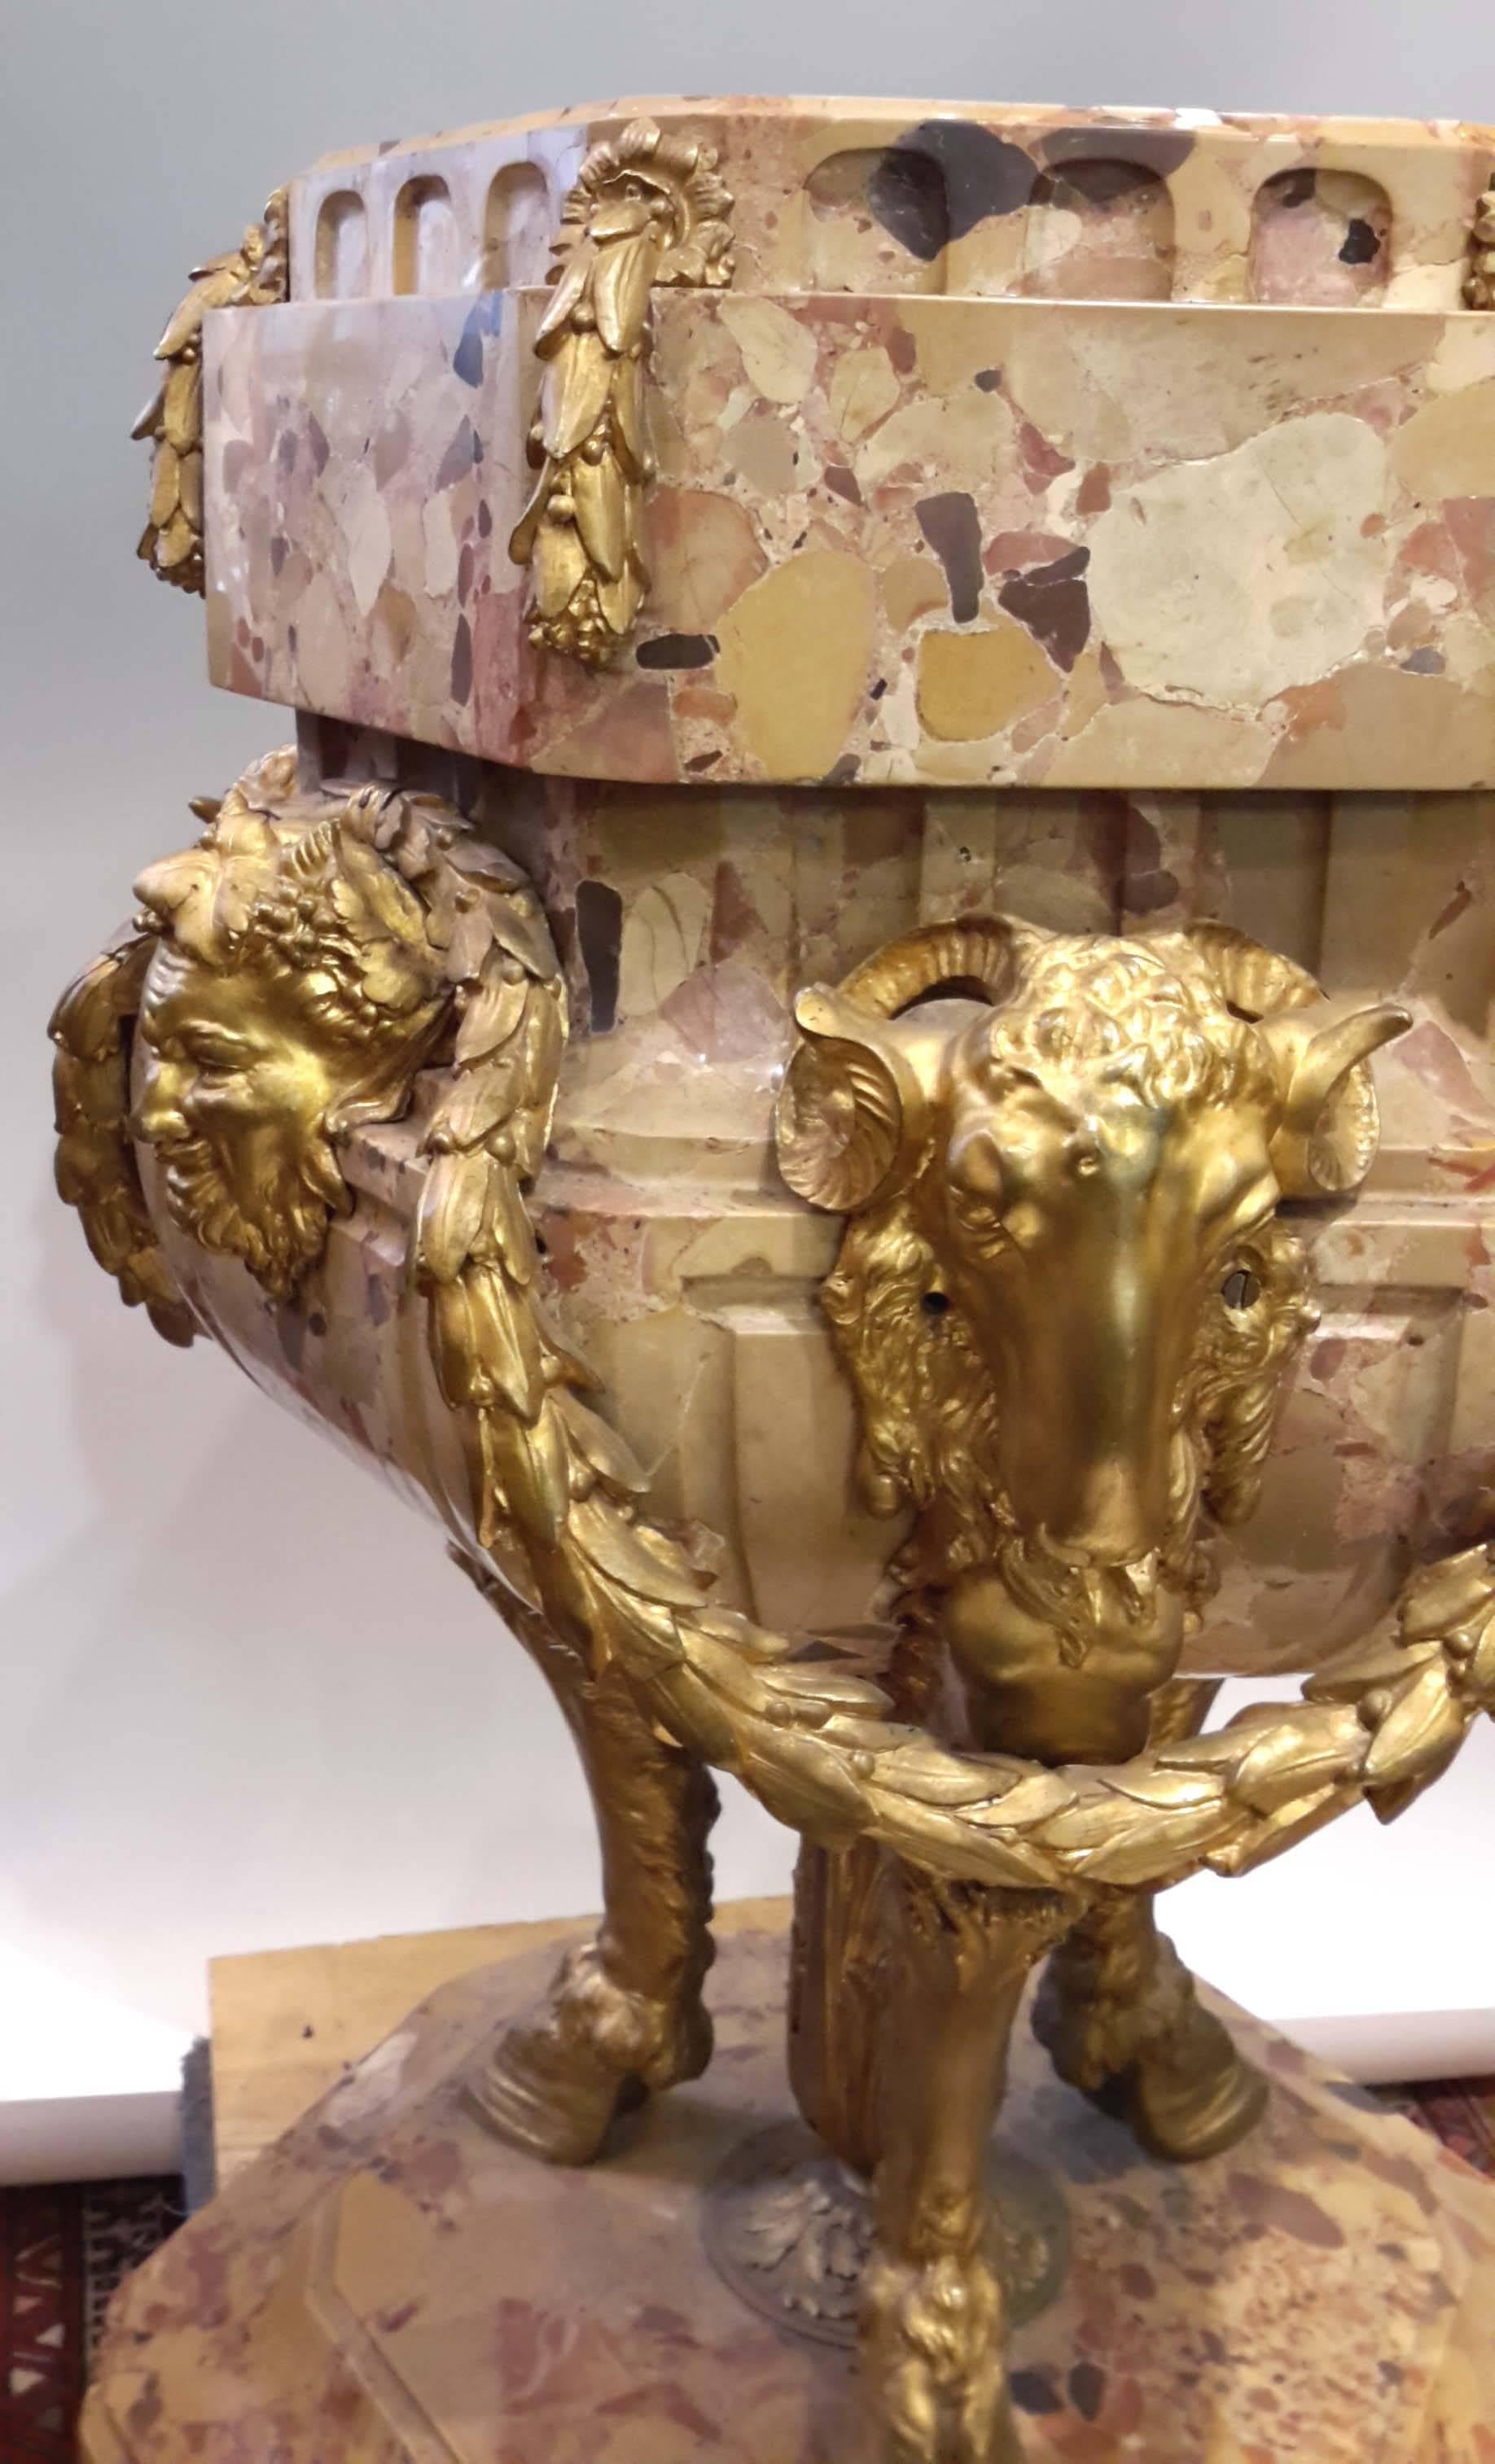 French, circa 1890. Great quality gilt bronze and marble Jardinière, planter.
Solid Breche D'Alep Marble with heavy cast and gilded bronze mounts of garlands, rams heads and masks of Bacchus.